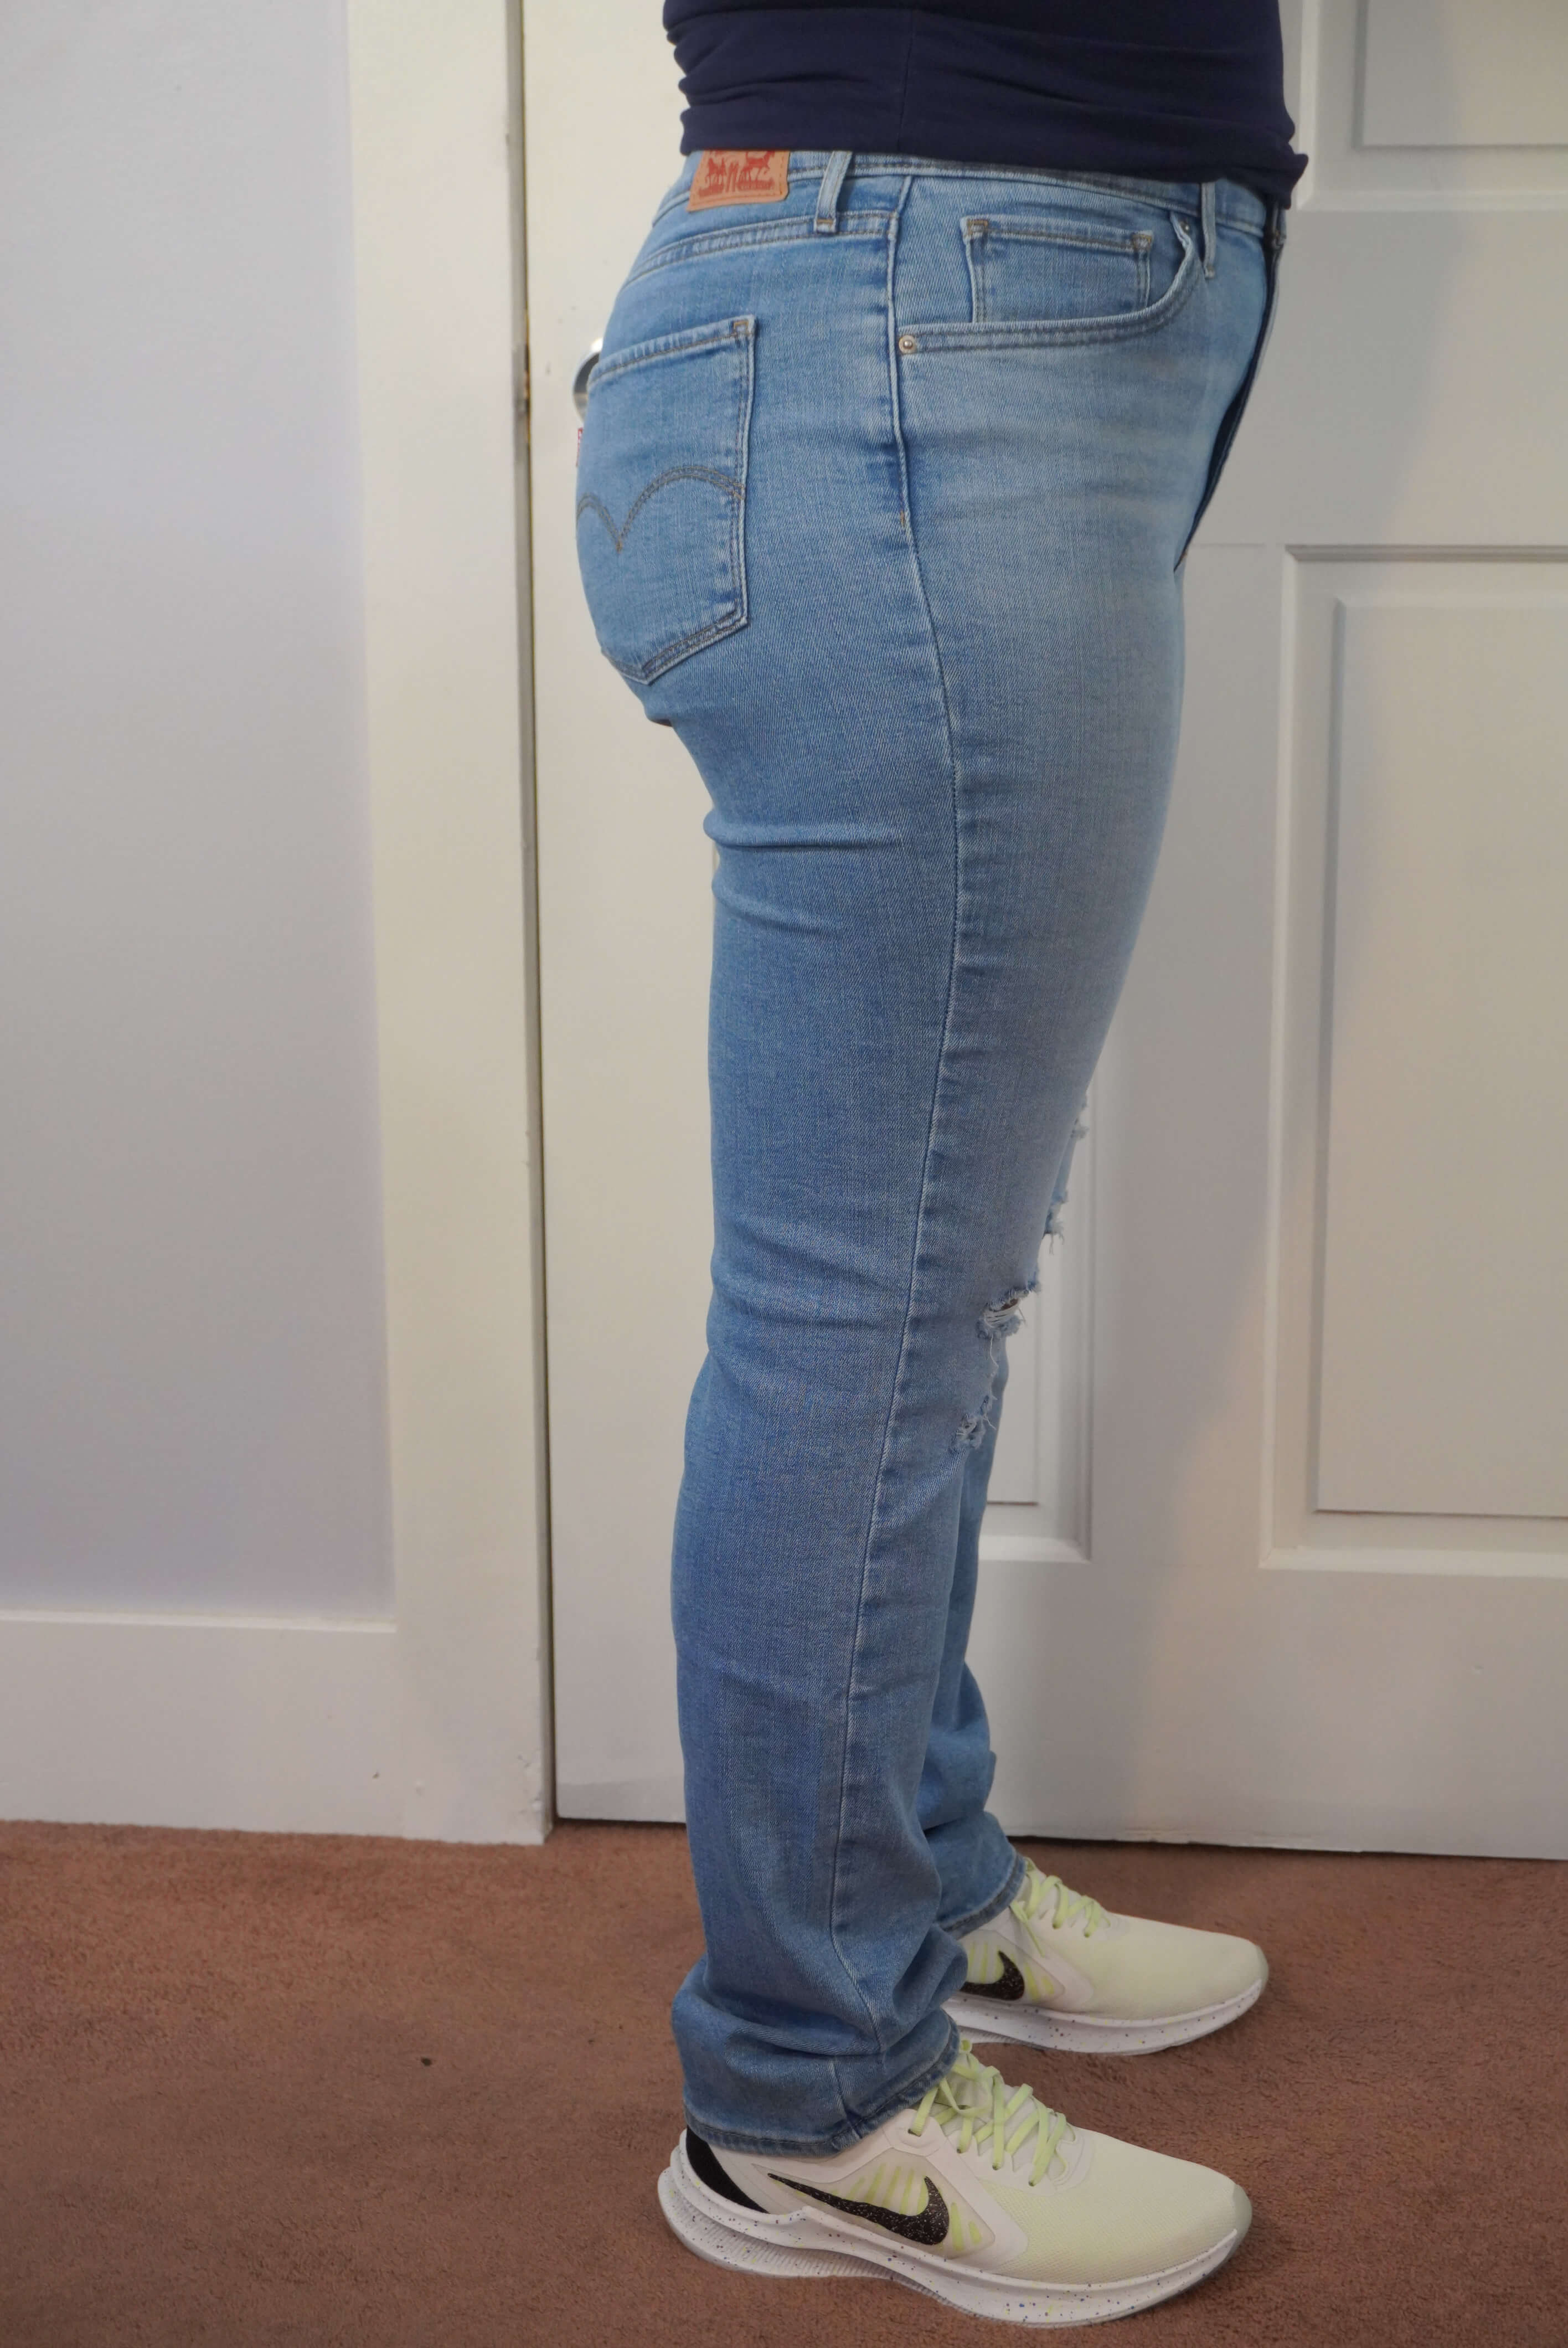 This image shows the side view of the 724 Levi's jeans. The back and front pockets of the jeans are showcased.